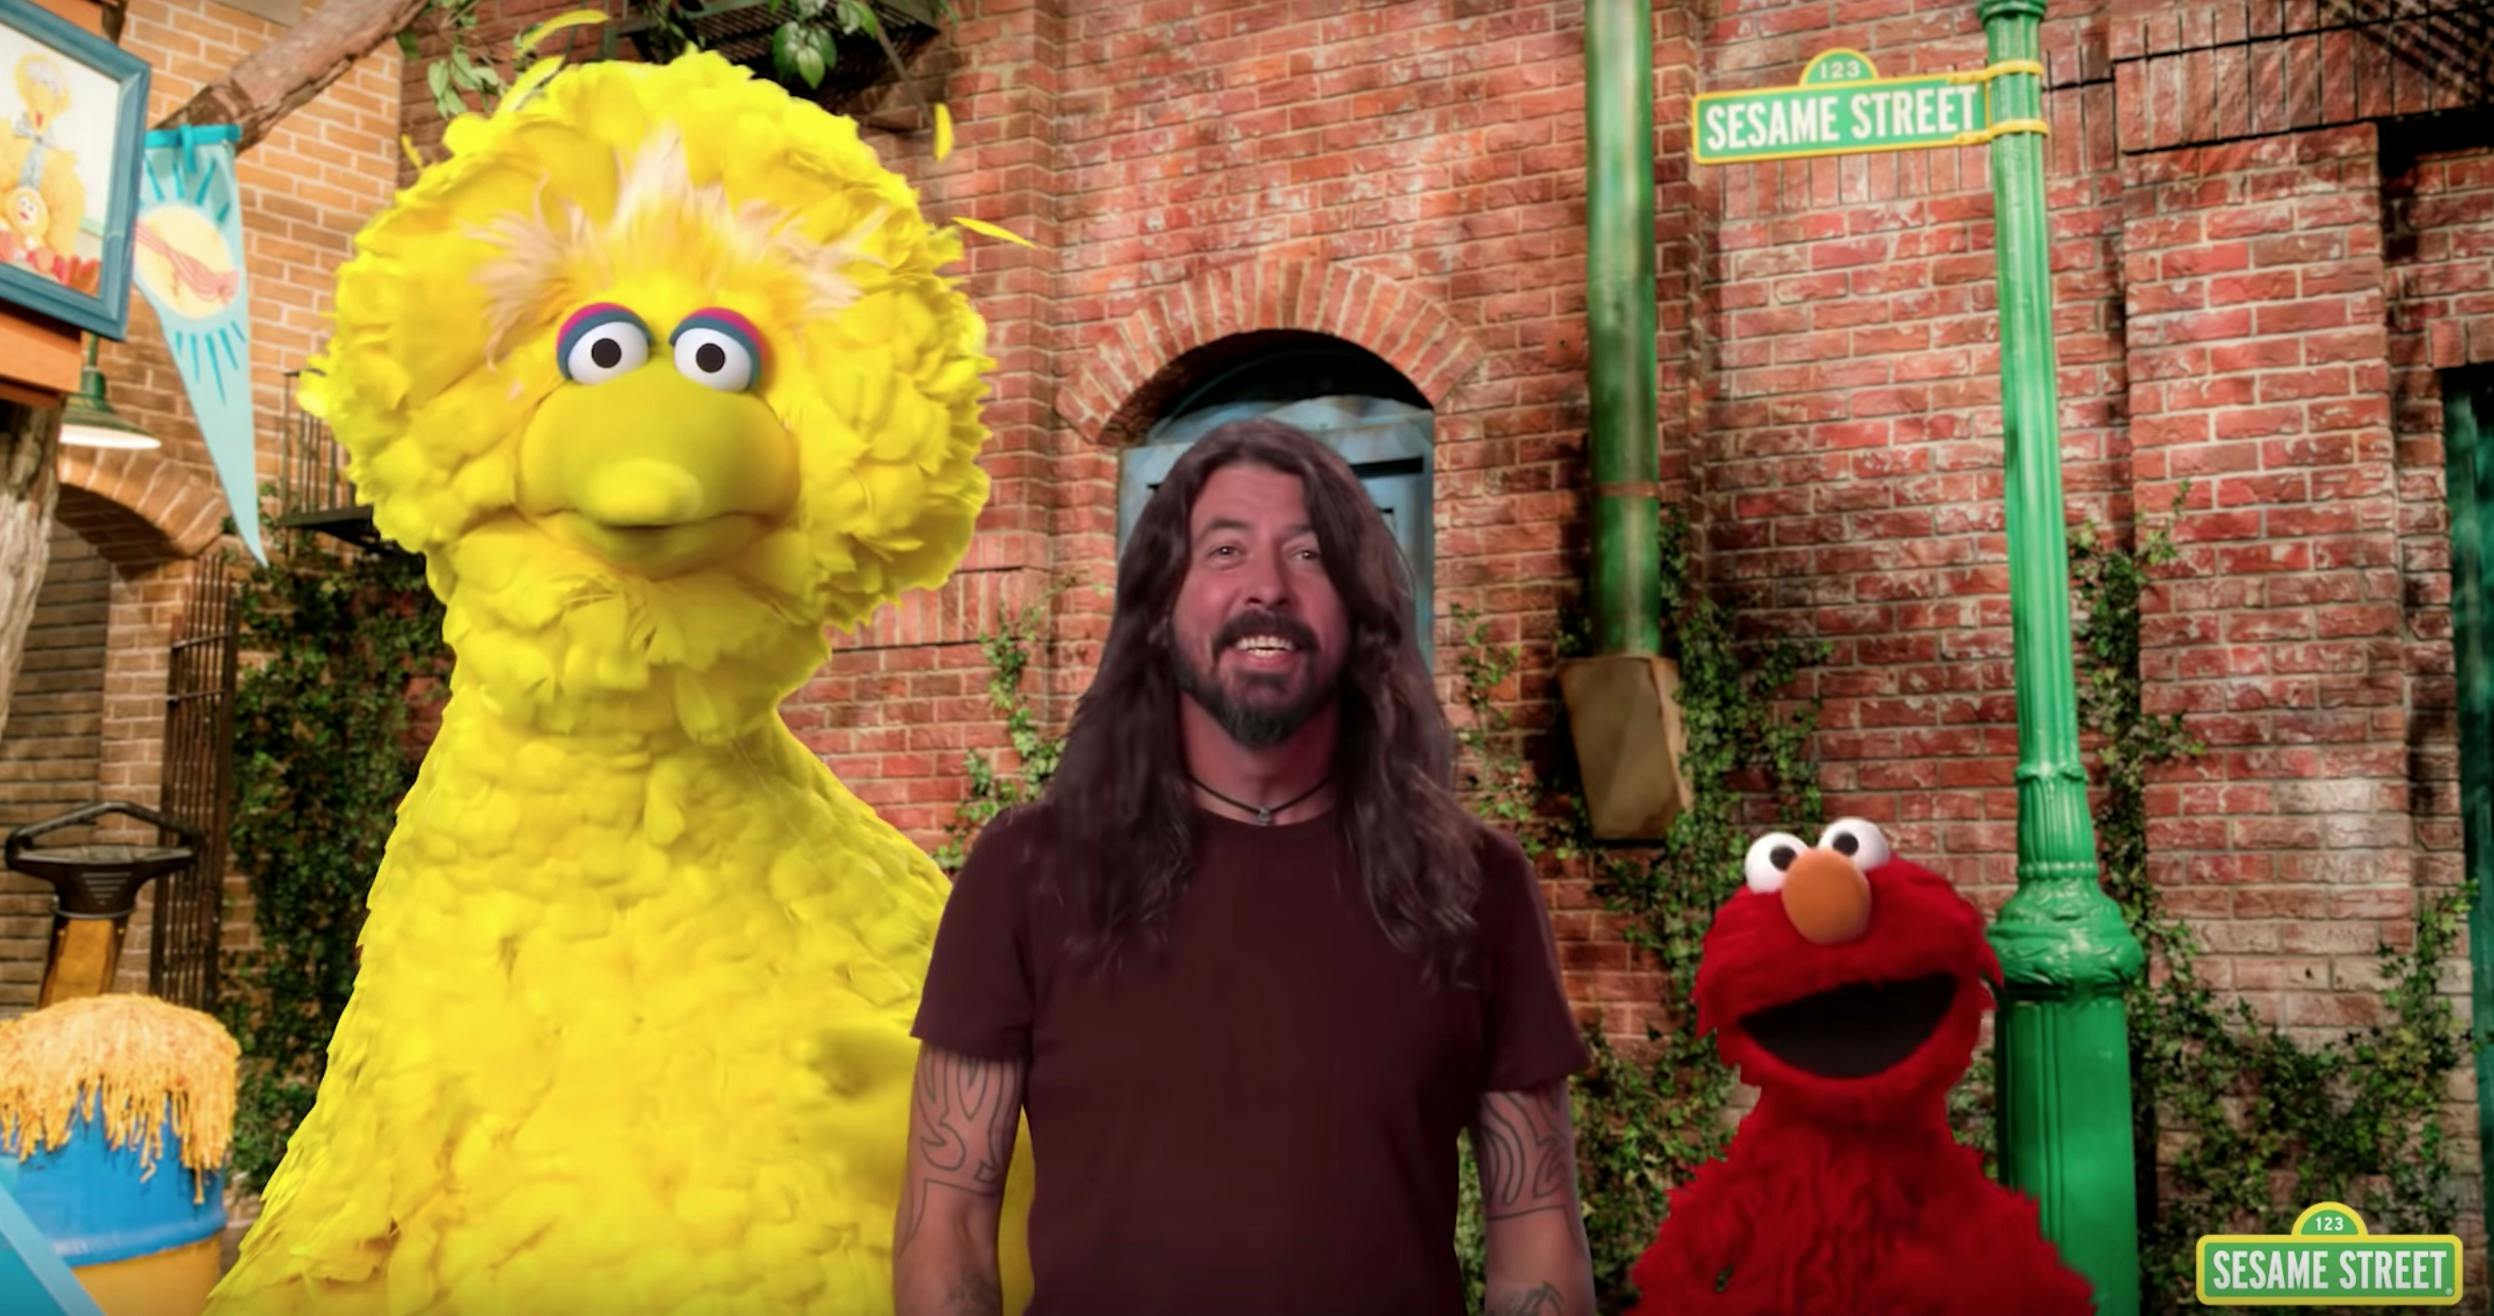 Watch Dave Grohl's Adorable Appearance On Sesame Street